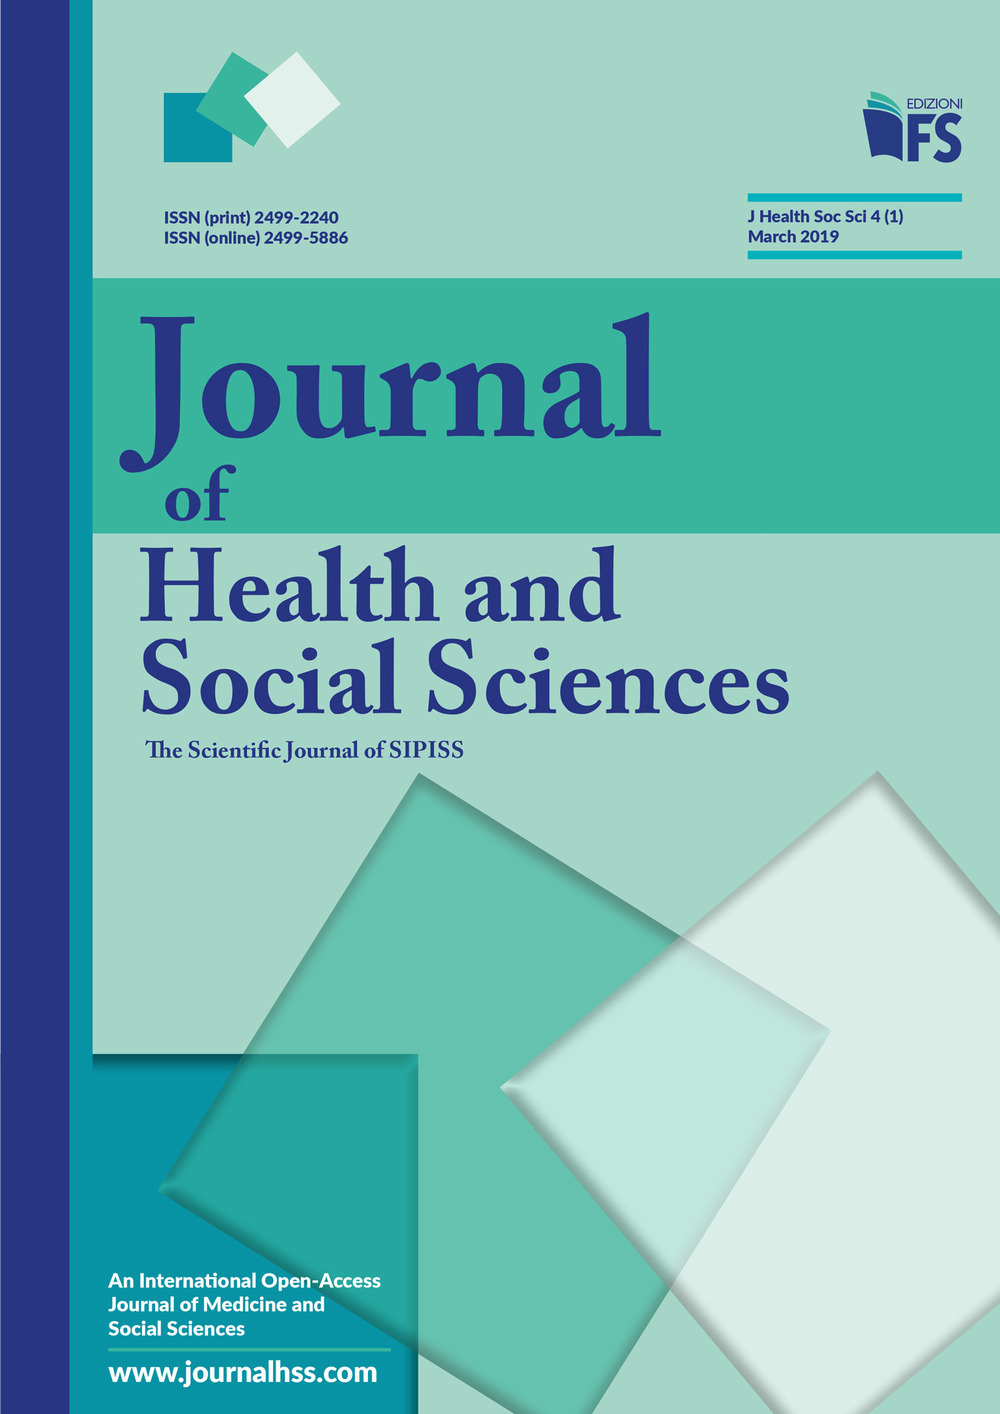 Journal of health and social sciences (2019). Vol. 1: March